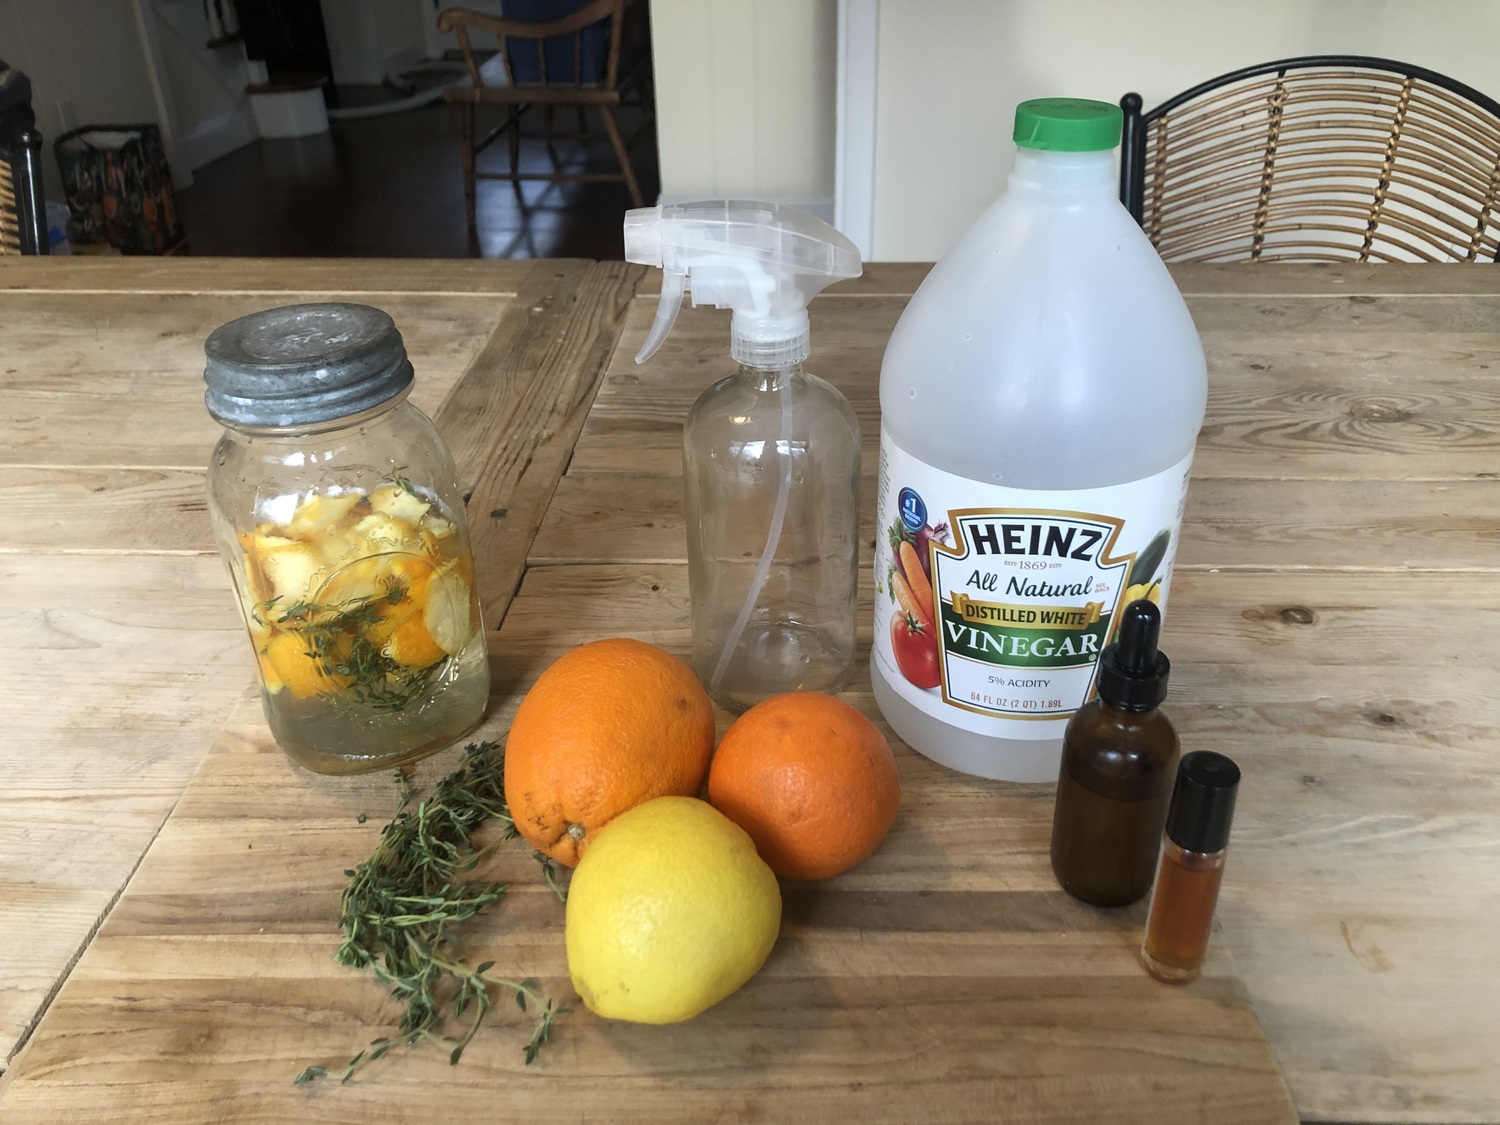 An all-purpose citrus scented cleaner is really easy to make. Combine vinegar, orange peels and a few drops of clove oil. I added thyme which has antibacterial qualities. Mix and match your favorite essential oil scents. JENNY NOBLE